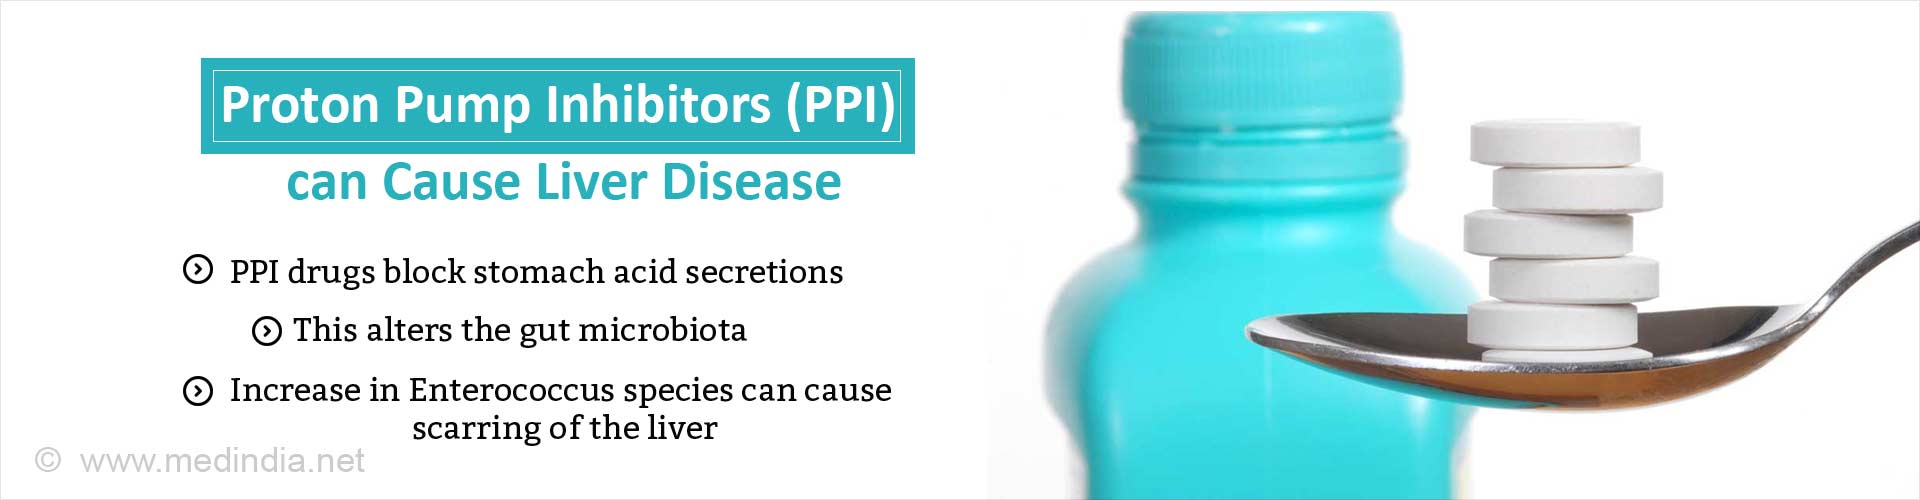 Proton pump inhibitors (PPI) can cause liver disease
- PPI drugs block stomach acid secretions
- This alters the gut microbiota
- Increase in enterococcus species can cause scarring of the liver